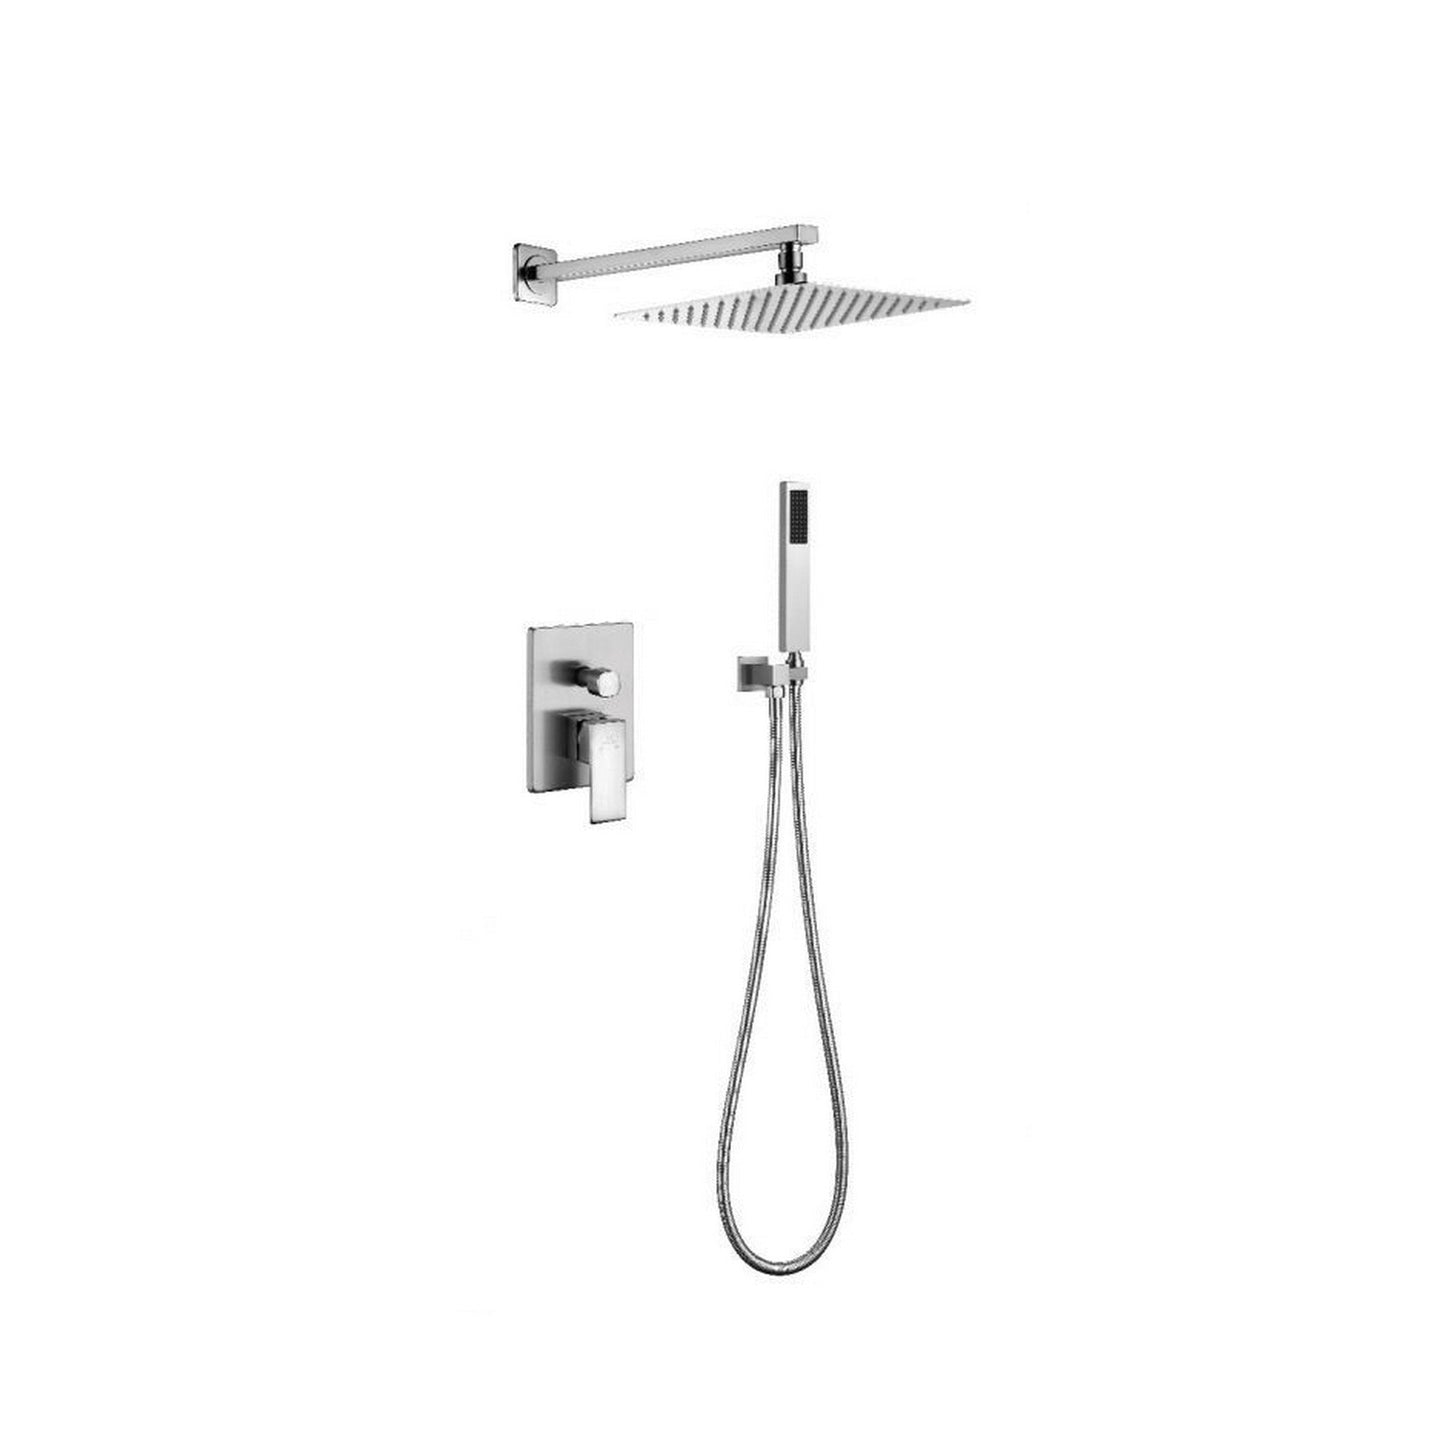 Ratel Chrome Wall-Mounted Shower System With 10" Square Rainfall Shower Head and Handheld Shower